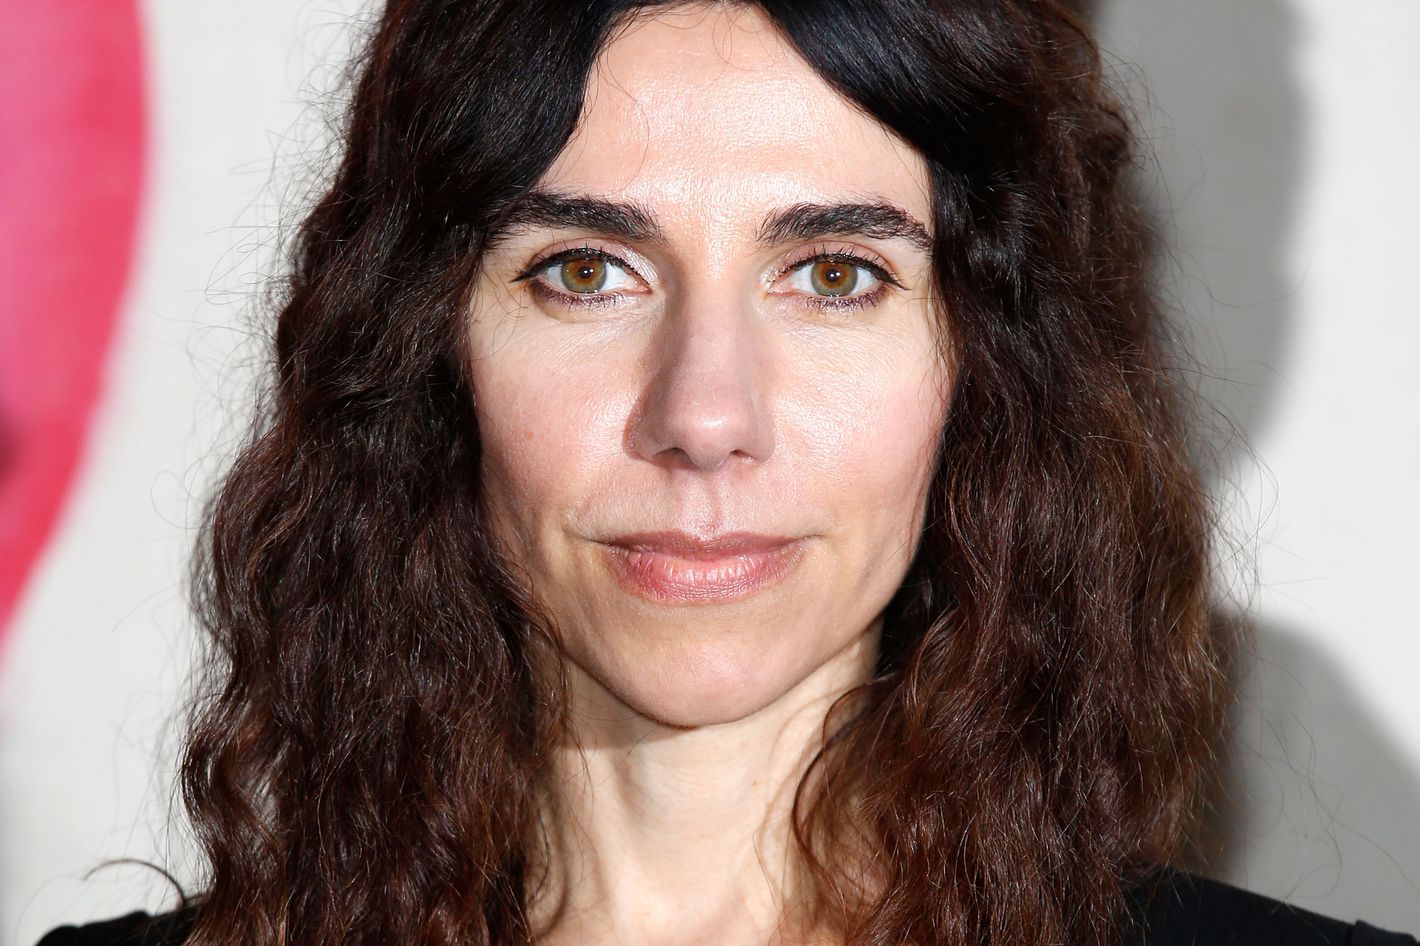 PJ Harvey's New Album Due Out Spring 2016, Which Gives You a Few Months to Get Ready to Rage